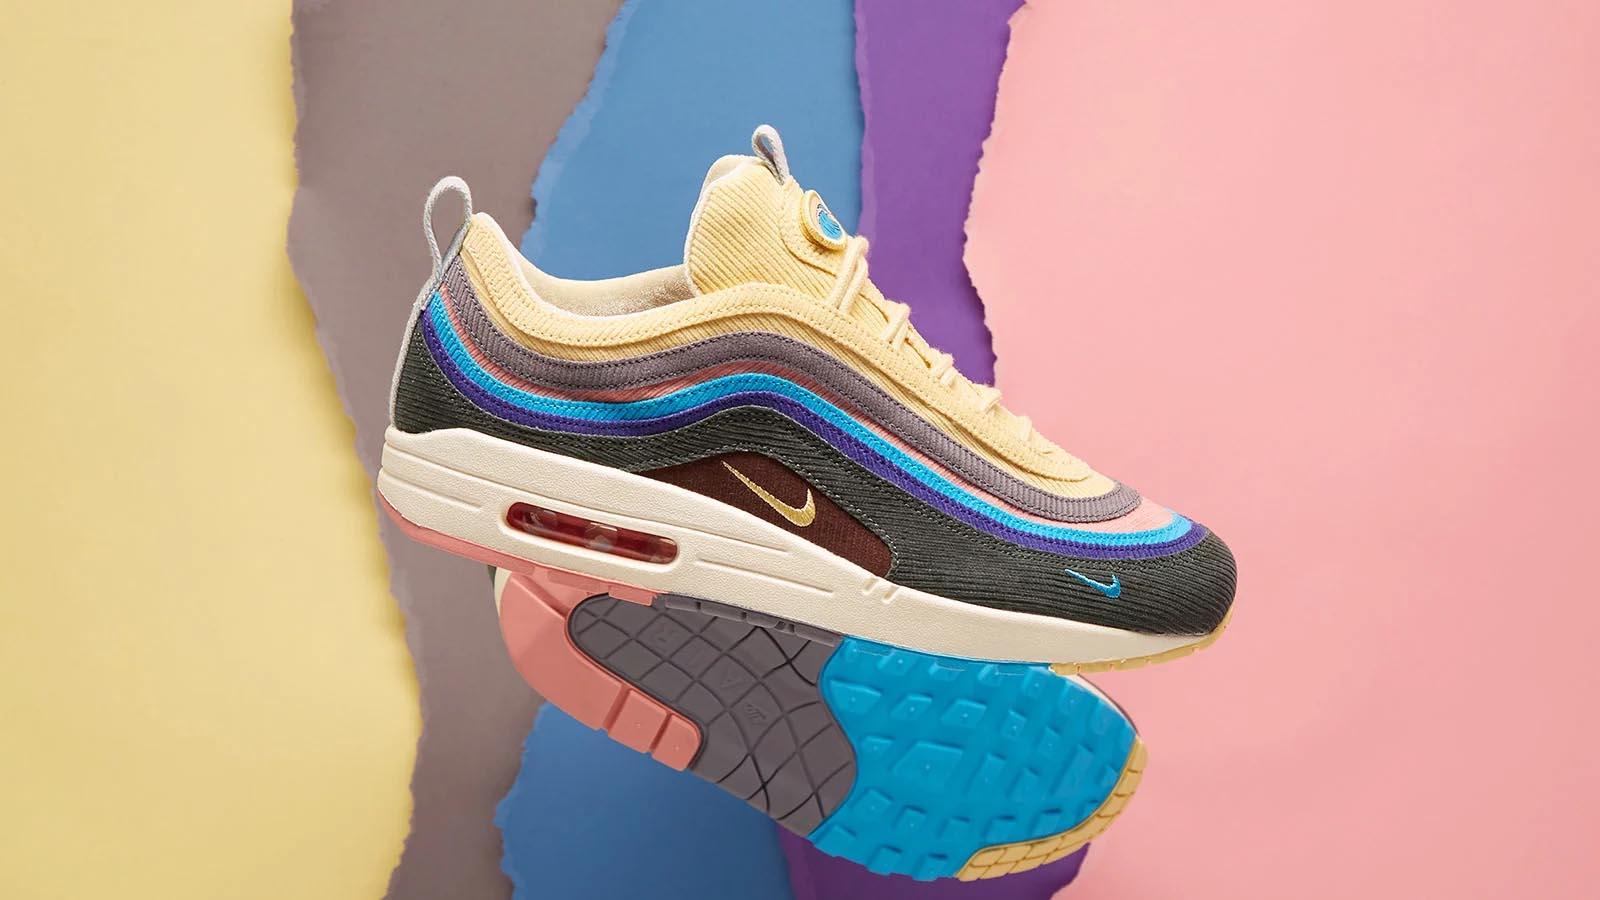 This Could Be Your Chance To Finally Cop The Sean Wotherspoon x Nike